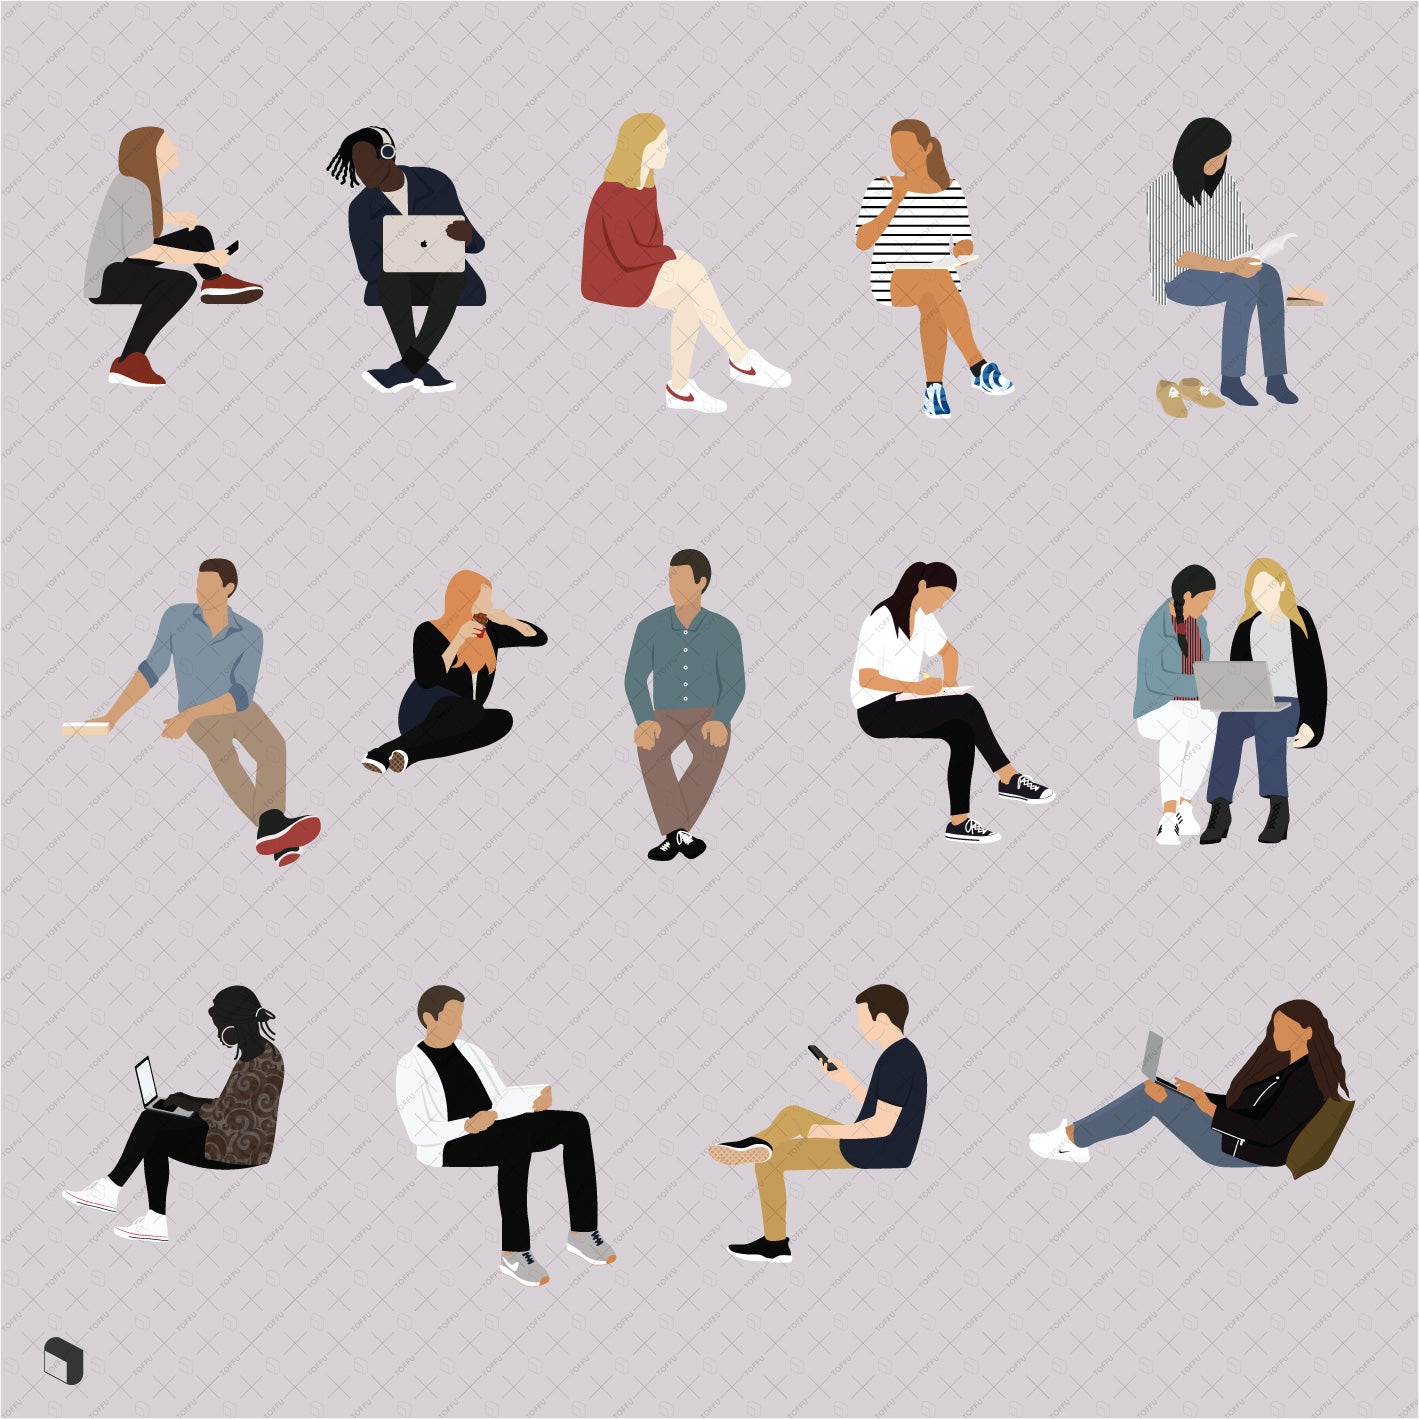 https://cdn.shopify.com/s/files/1/0491/8162/2439/products/pp_flatvector-people-sitting.jpg?v=1607616995&width=2838